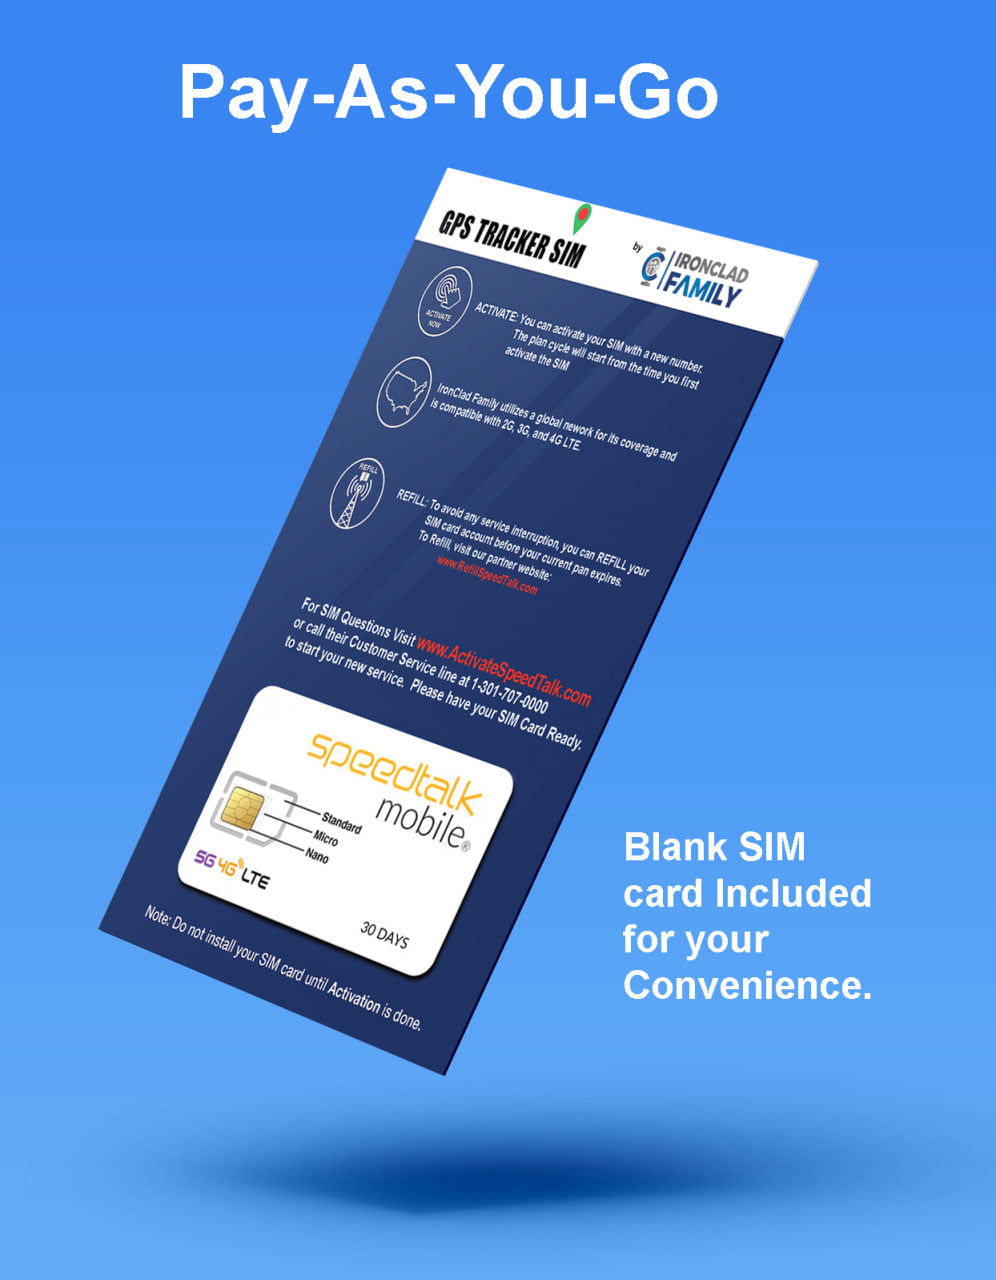 Pre-activated SIM card for pay-as-you-go service